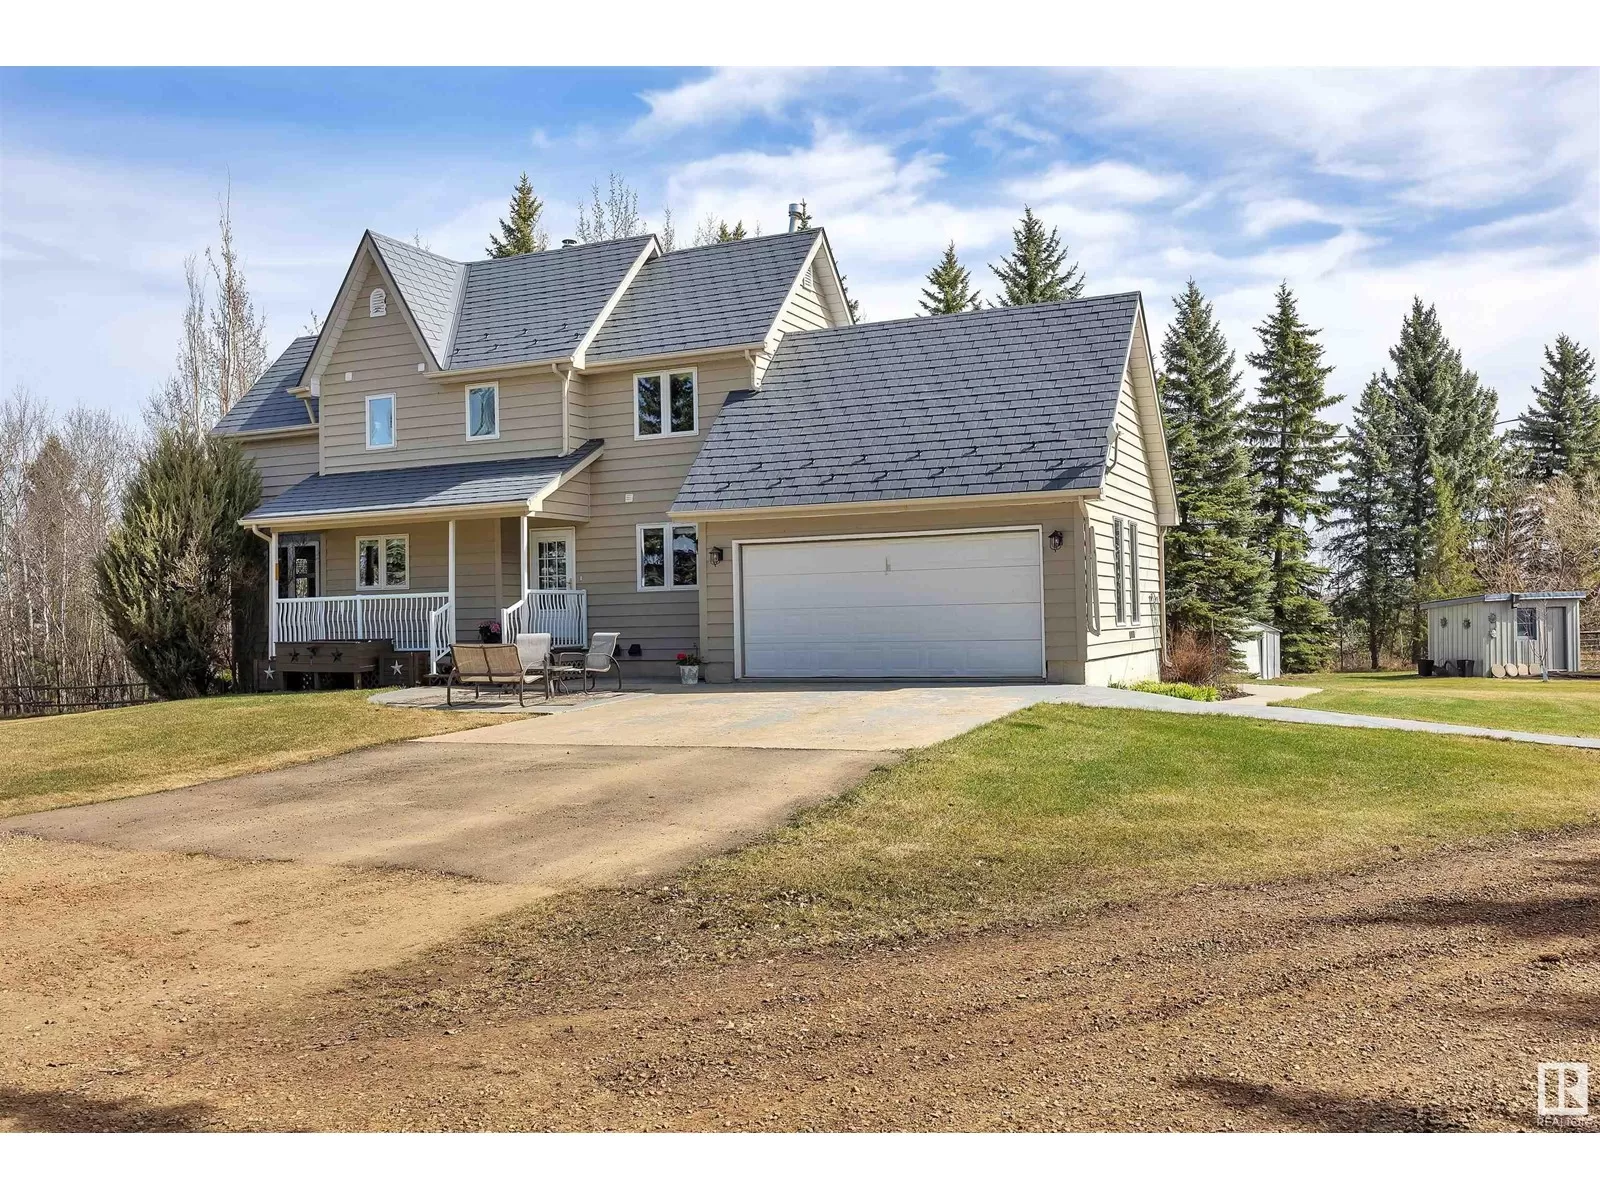 House for rent: 464015 Range Road 234, Rural Wetaskiwin County, Alberta T9A 1X1